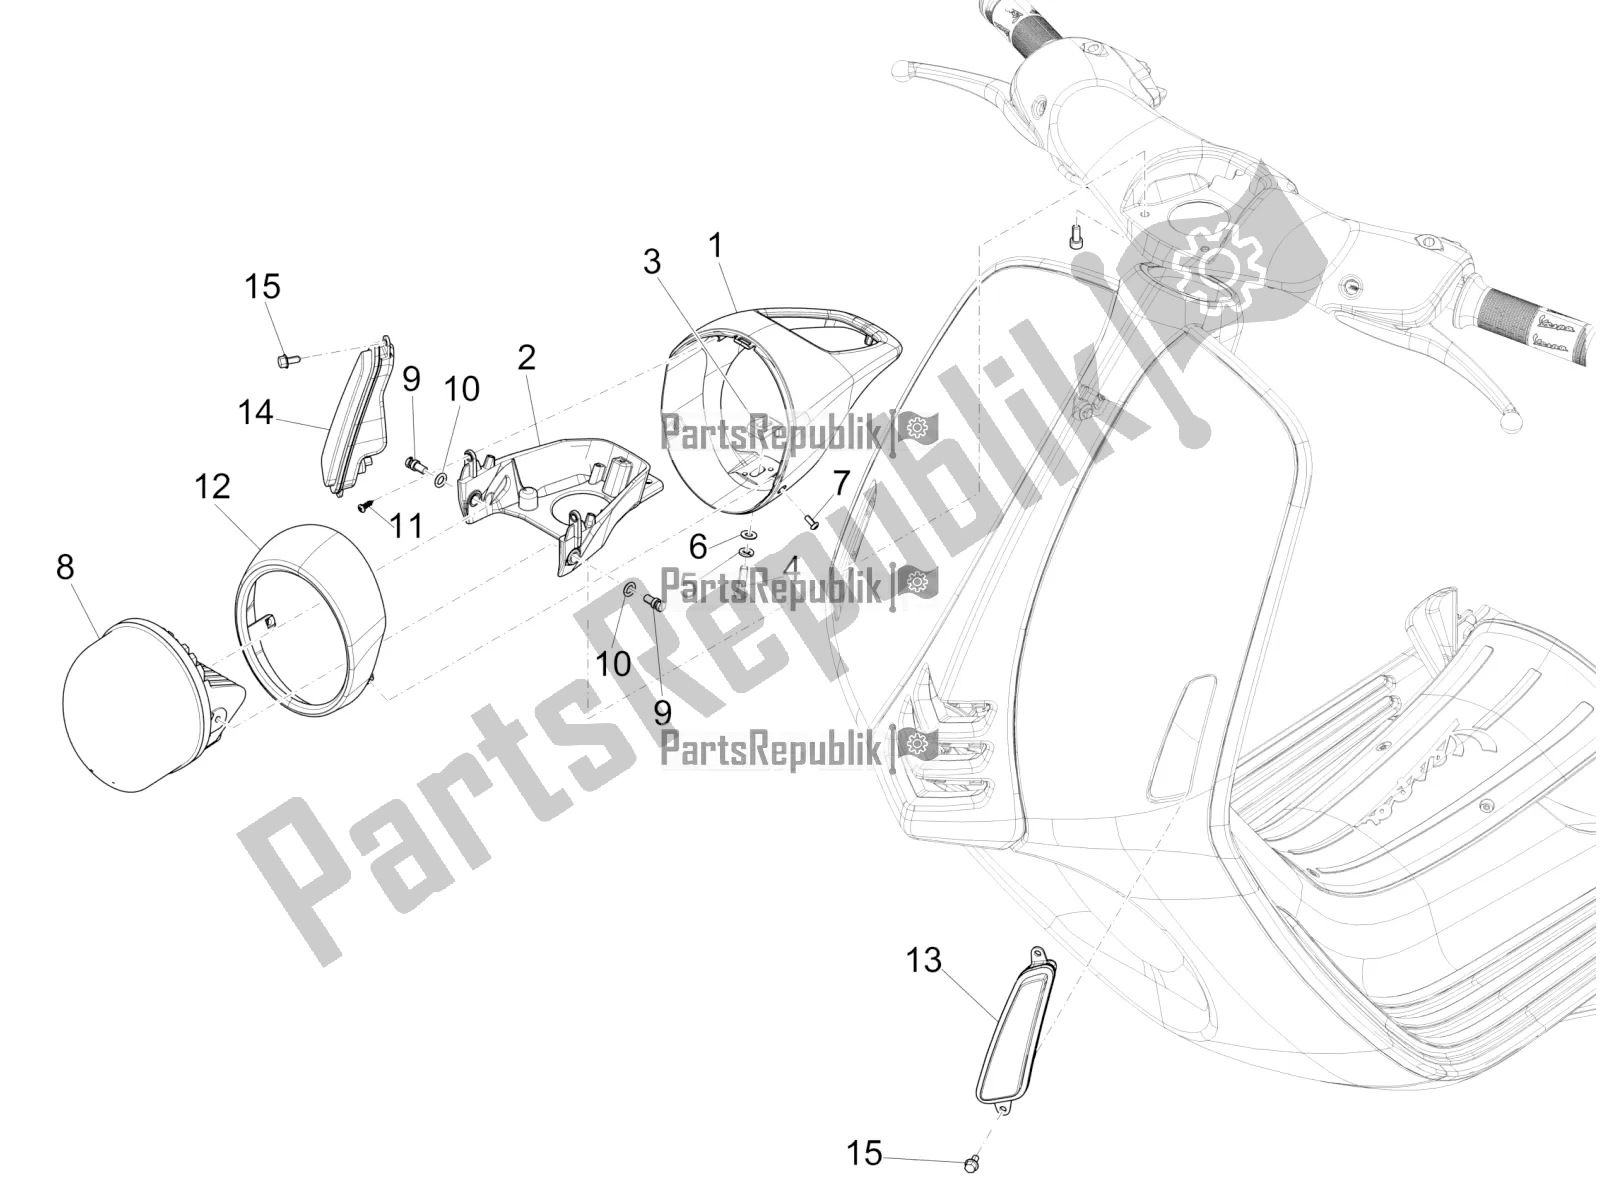 All parts for the Front Headlamps - Turn Signal Lamps of the Vespa 946 150 ABS CD Apac 2022